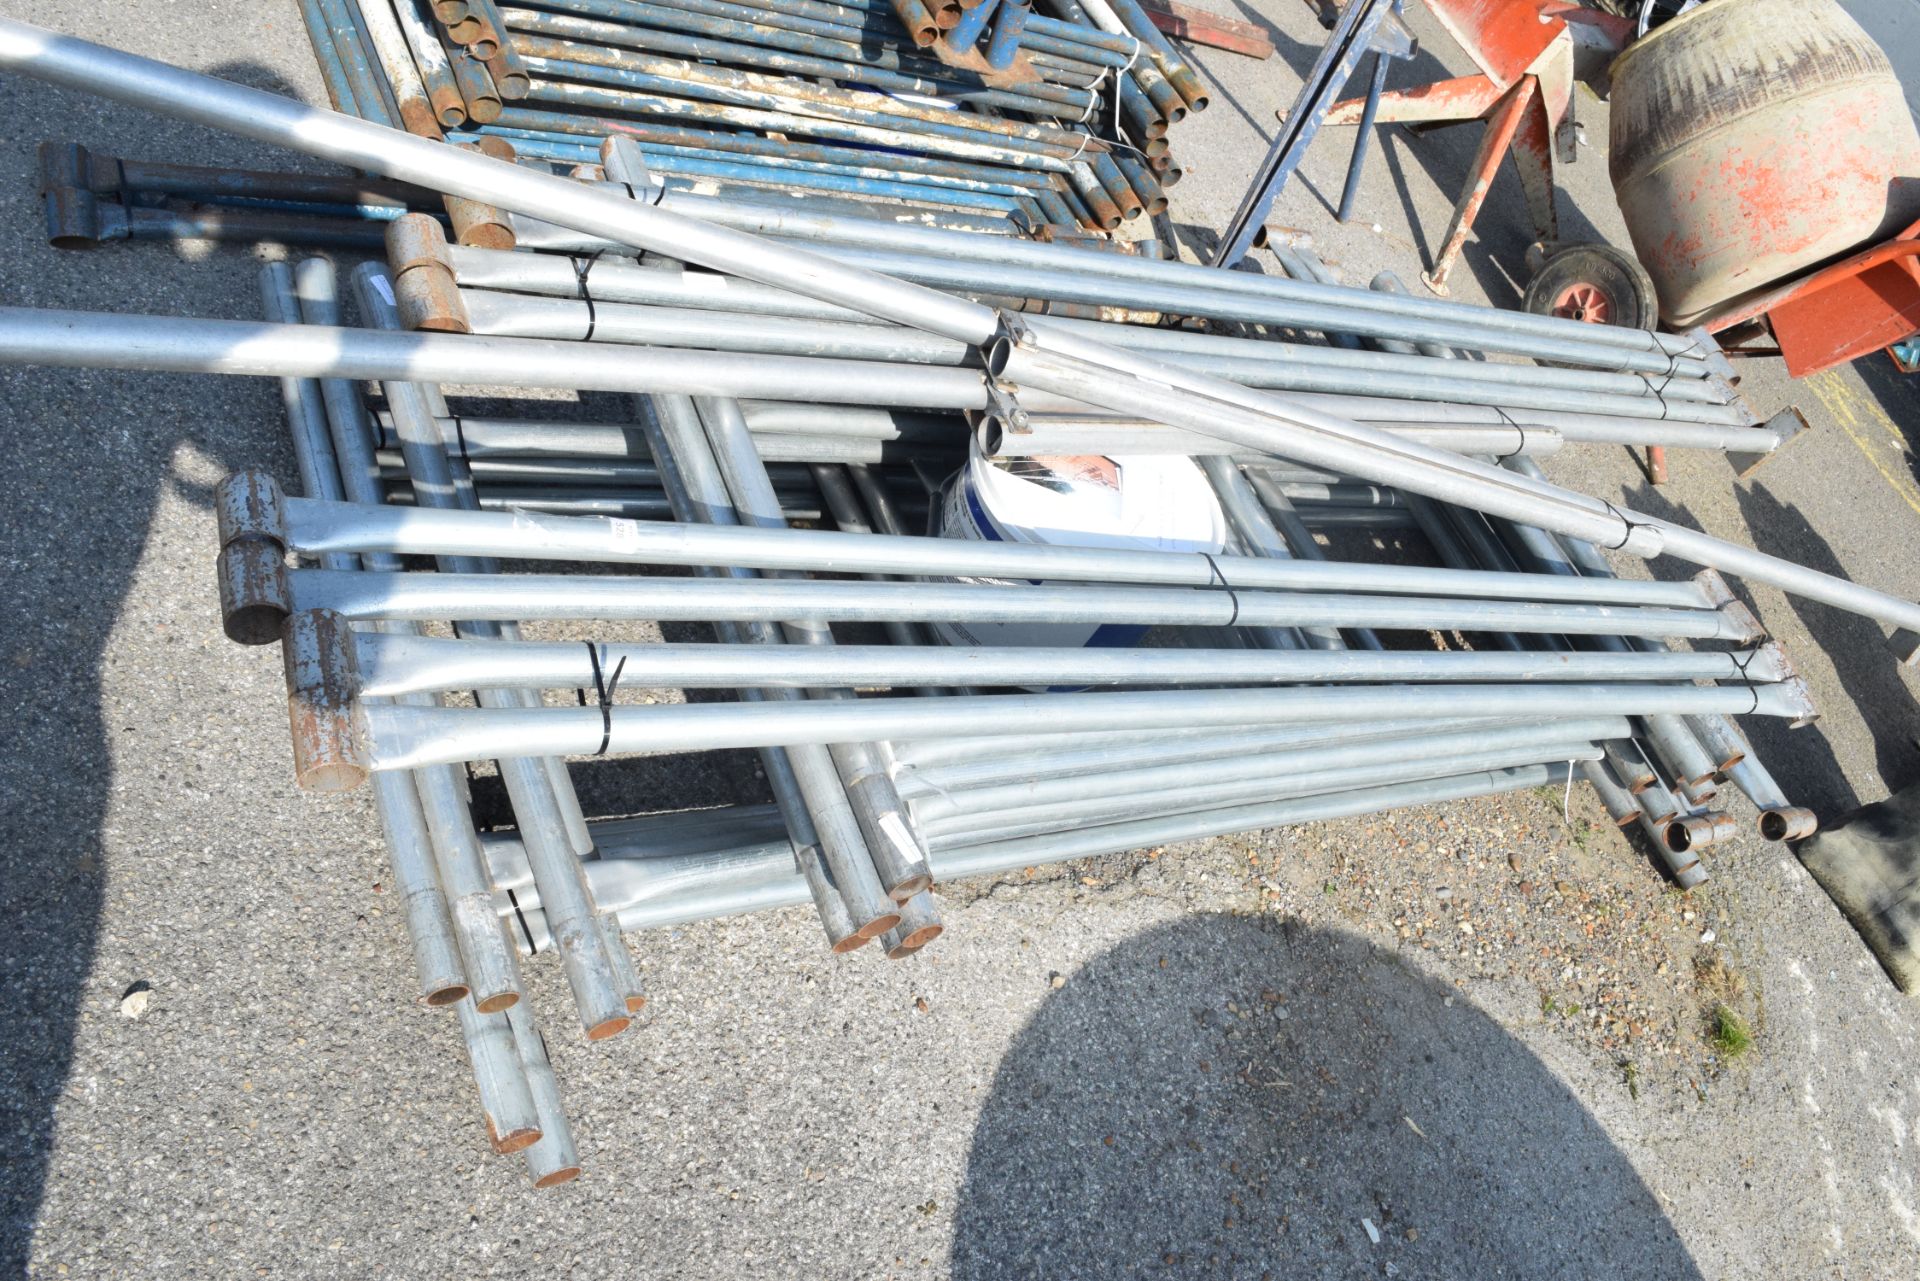 GALVANISED SCAFFOLDING TOWER WITH ANGLED SUPPORTS, ADJUSTABLE FEET AND BOLTS ETC FOR OUTRIGGERS